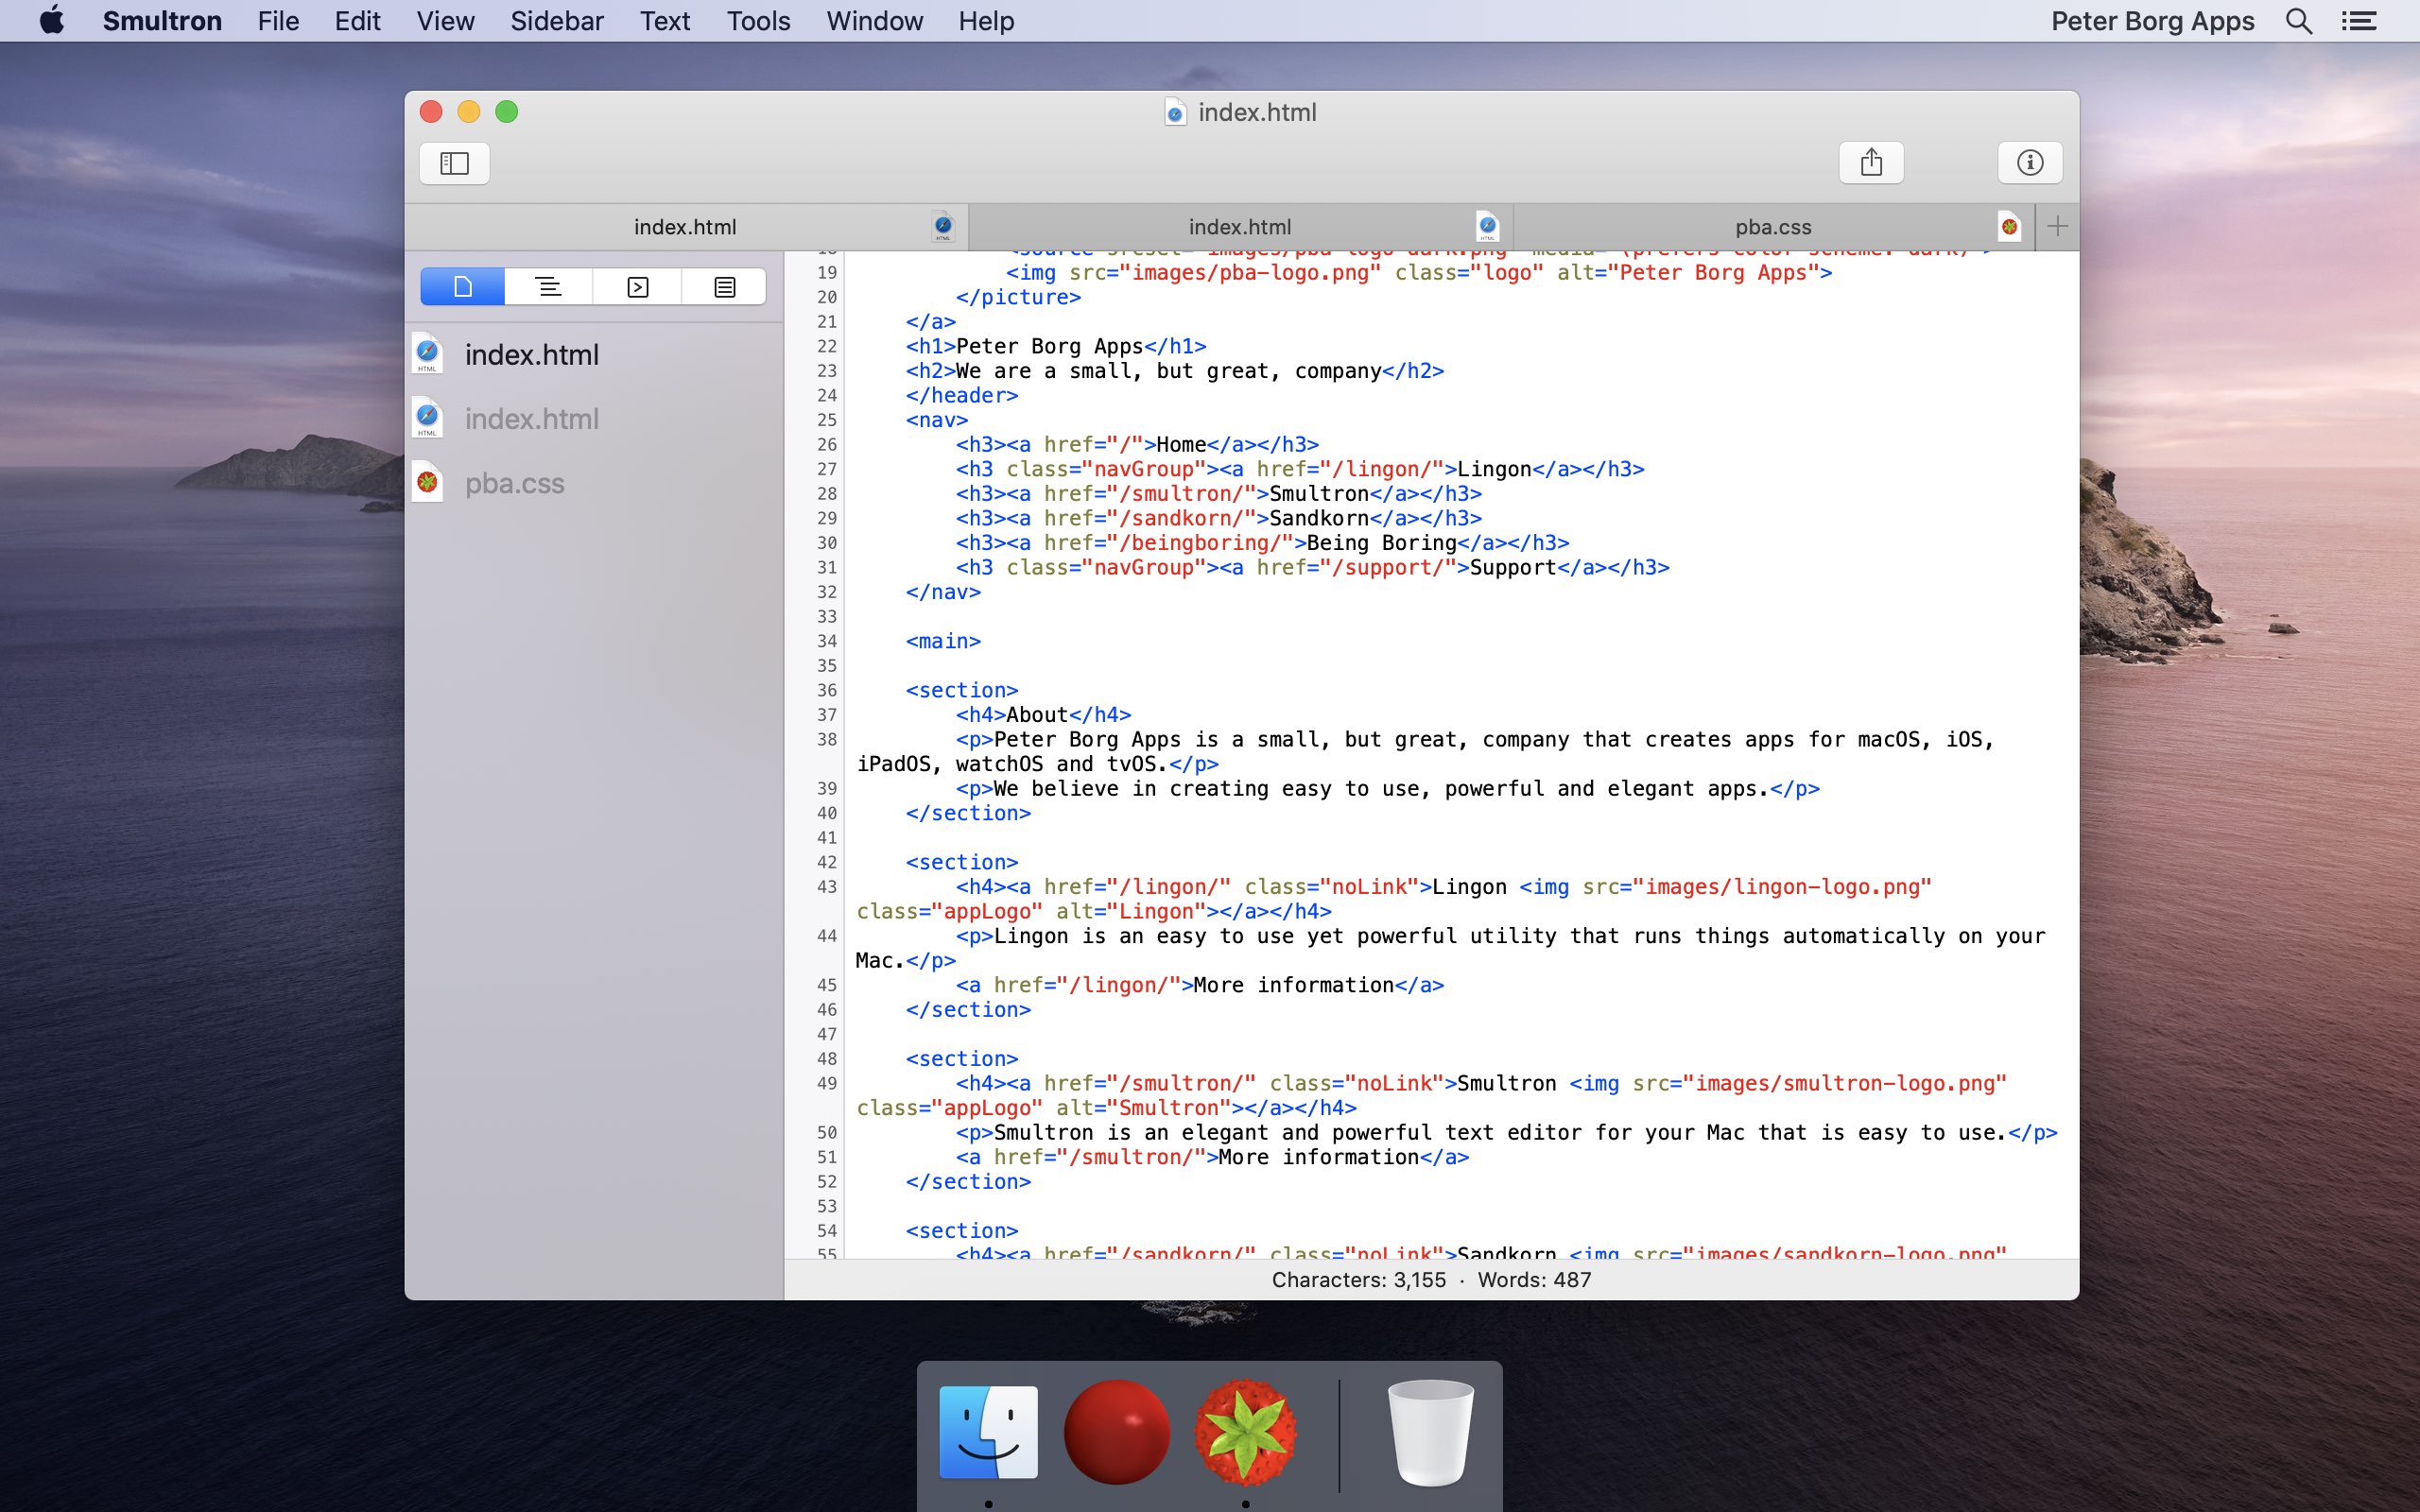 Best Text Editor For Mac 10.13